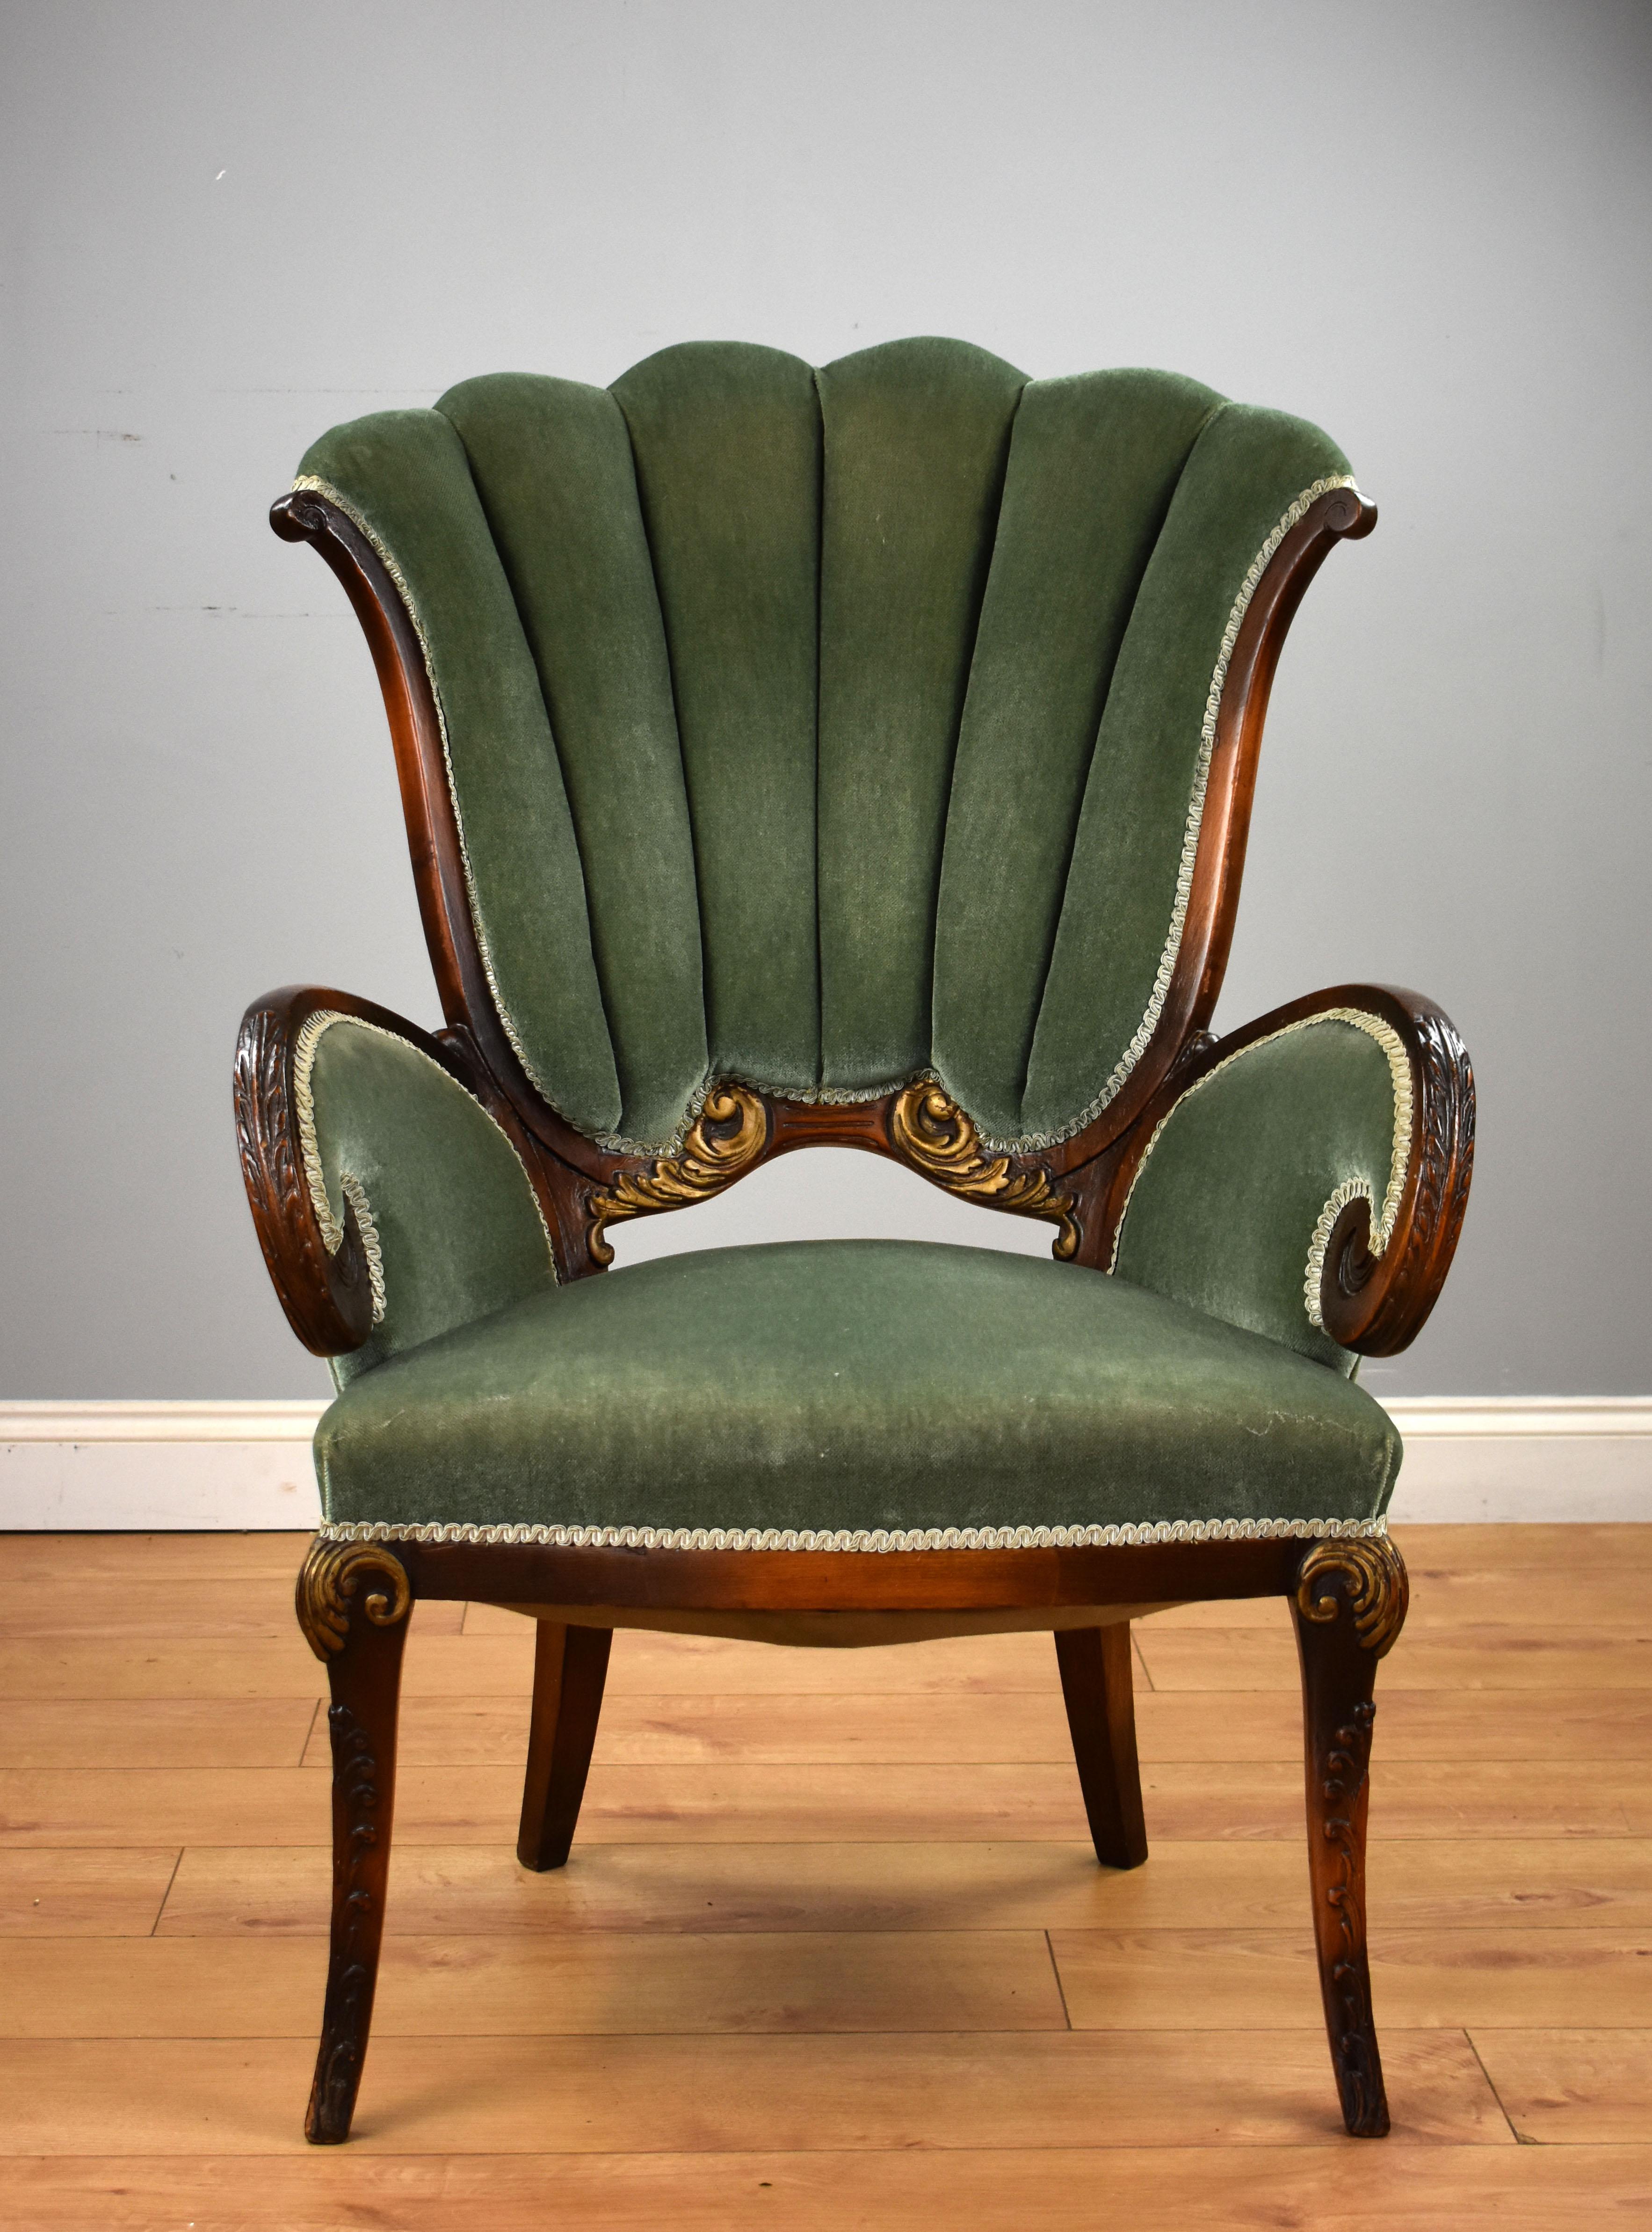 For sale is a good quality 19th century Victorian drawing room chair, having a fan shaped back, standing on carved legs. The chair remains structurally sound and is in good condition for its age.

Measures: Width: 30